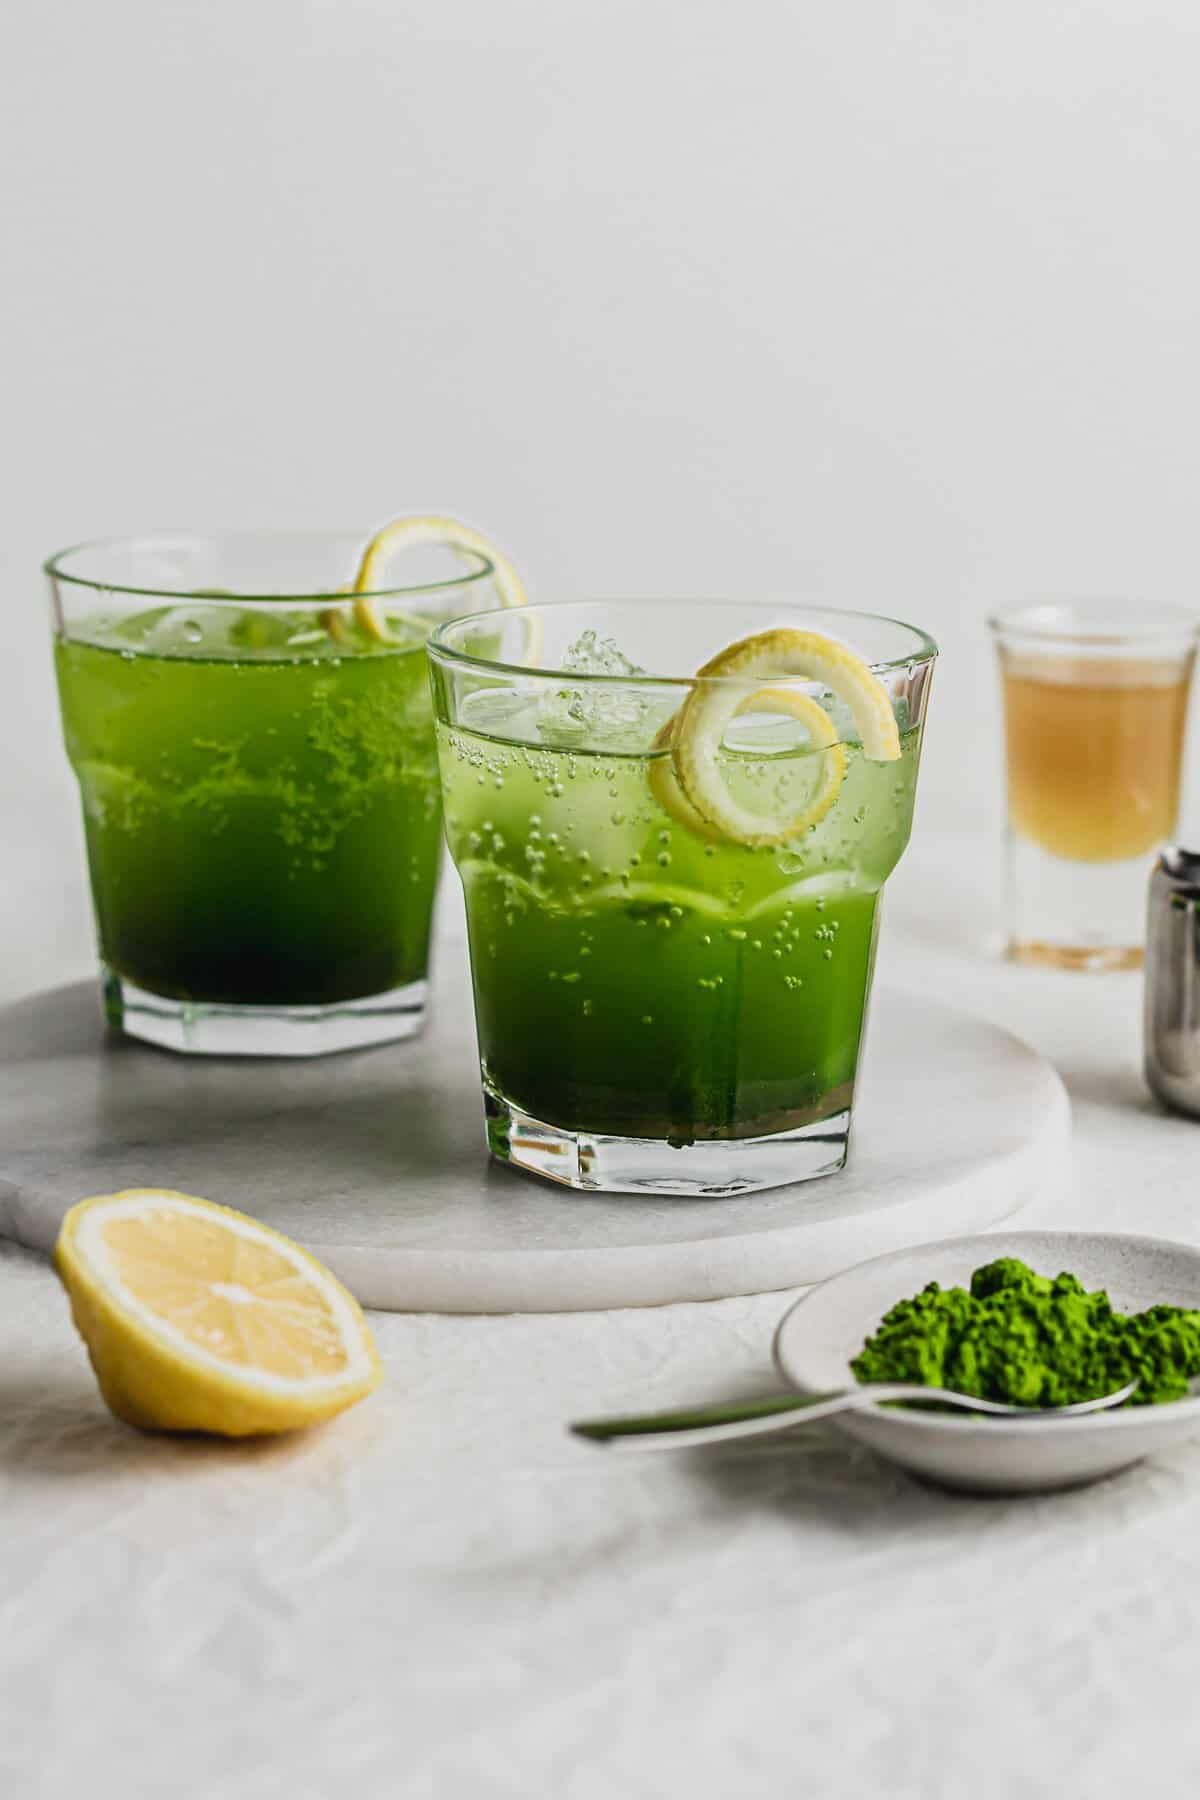 Sipping outside the box: 11 unique drinks using matcha tea powder